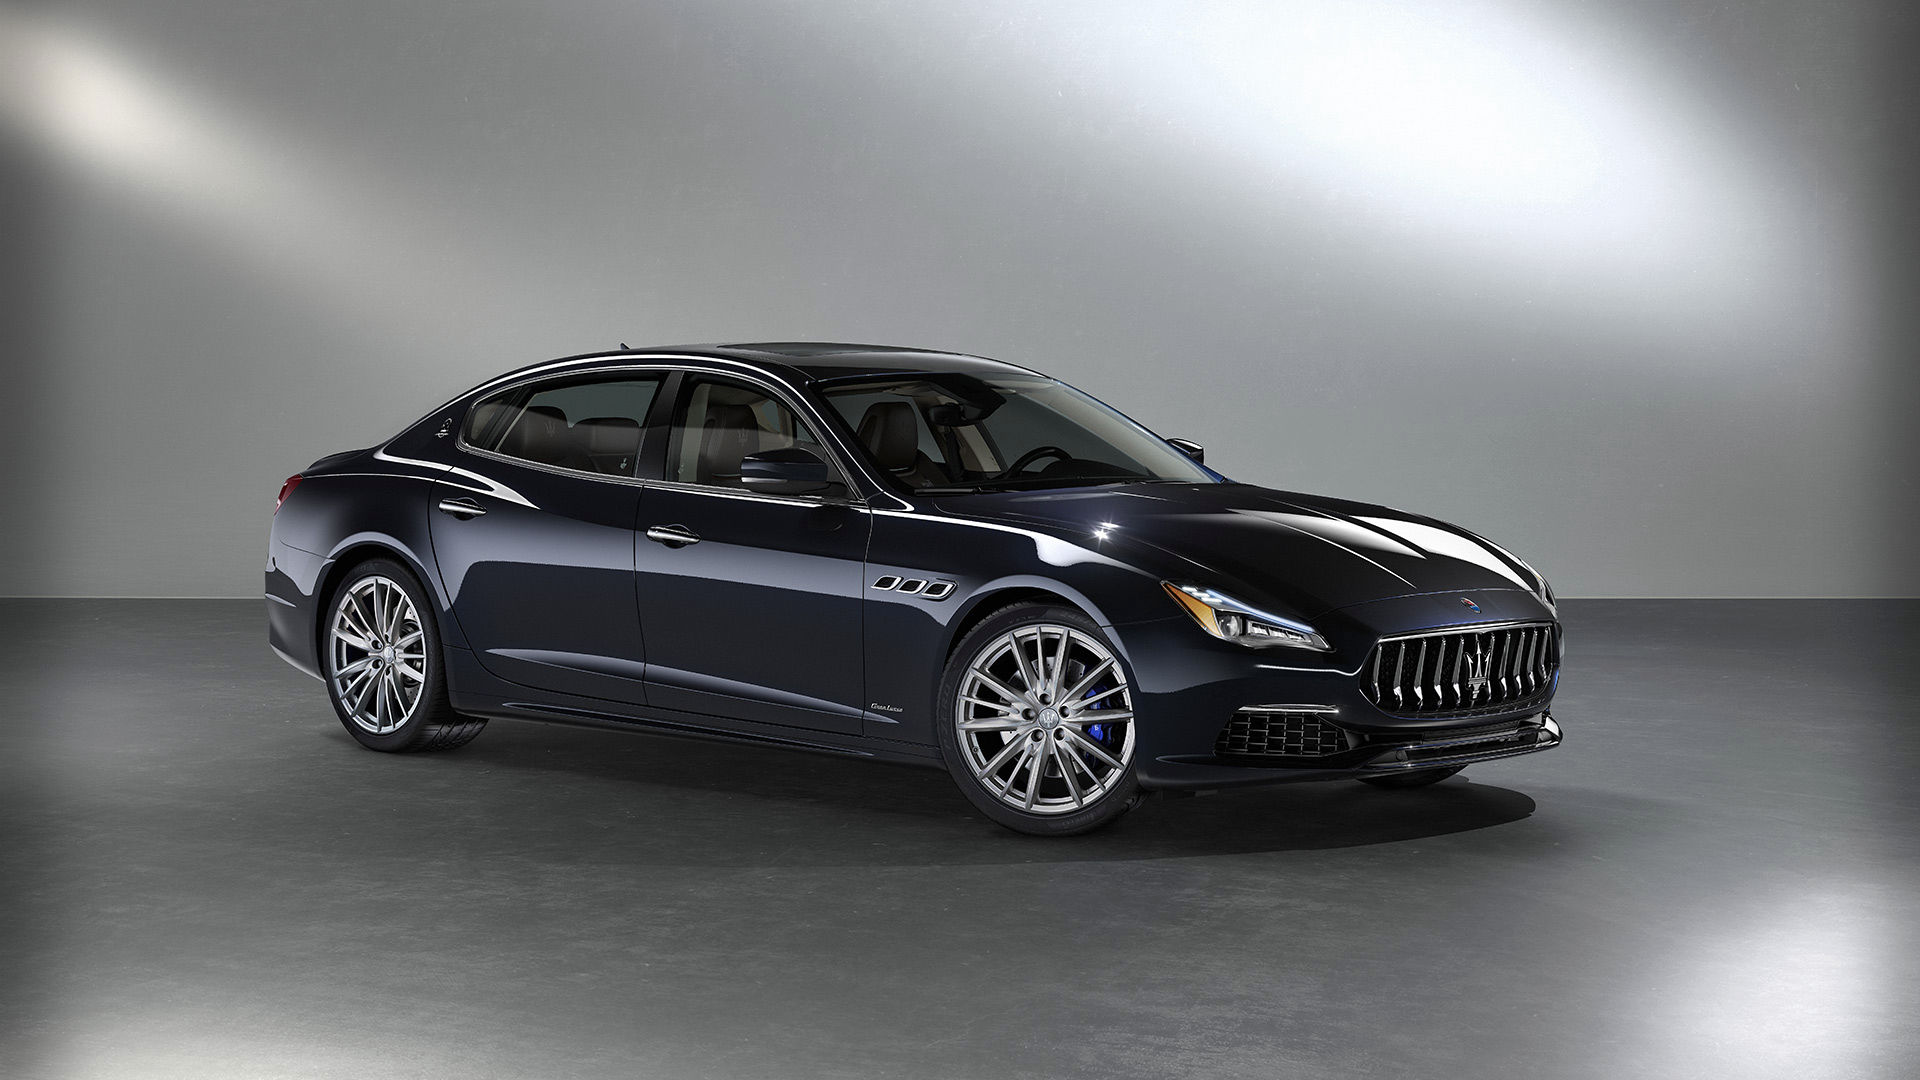 Front view of Maserati model